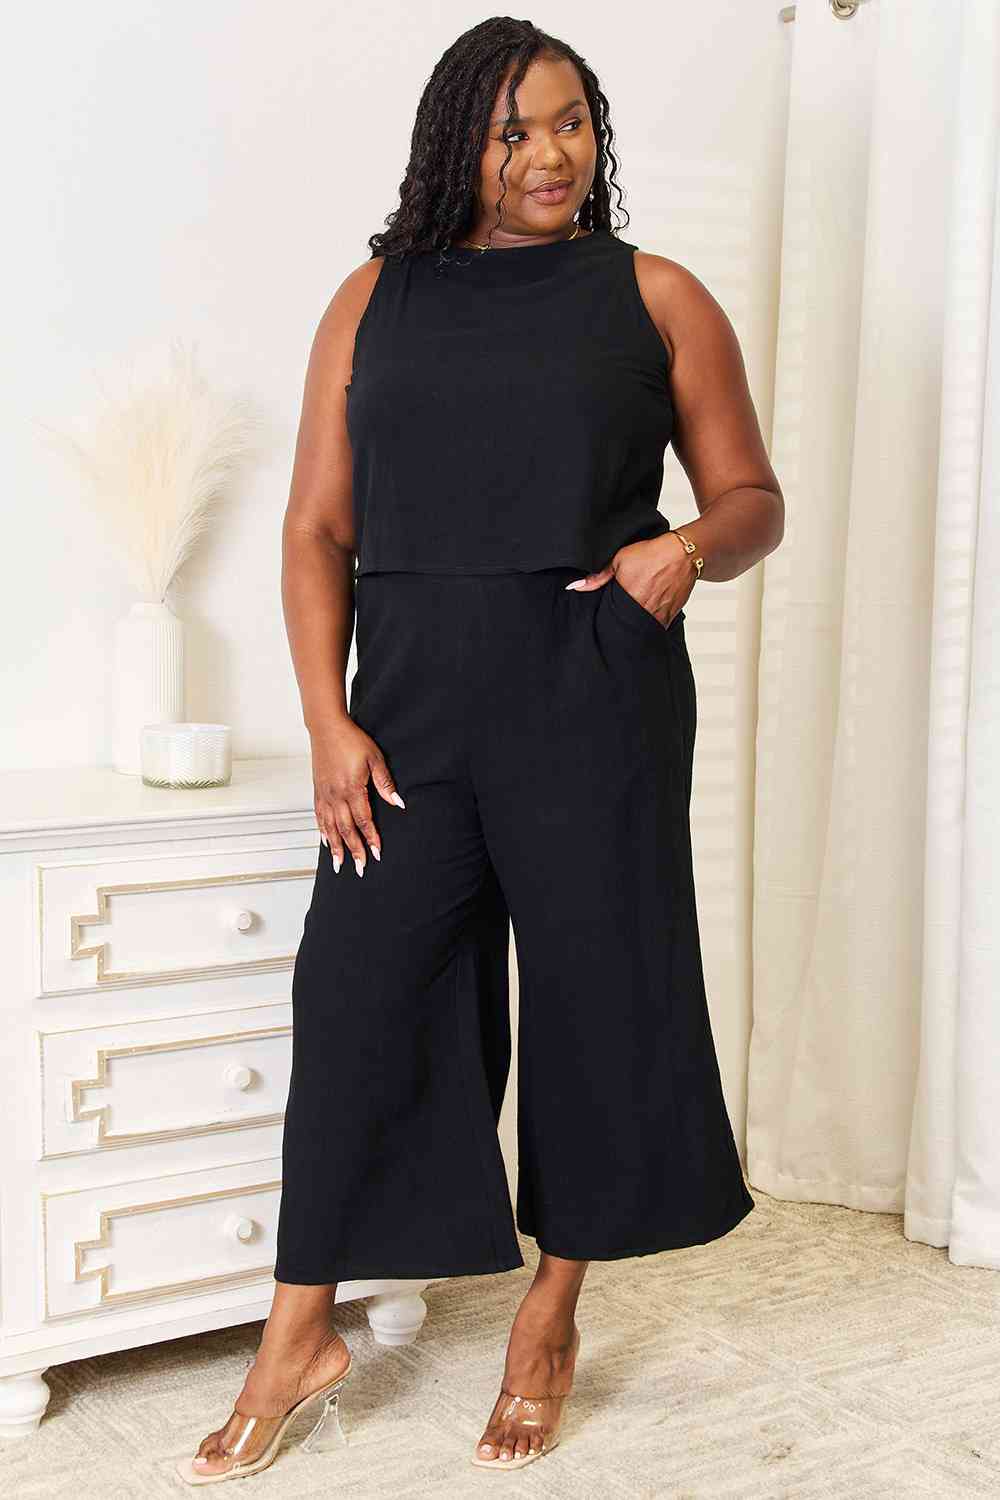 Double Take Buttoned Round Neck Tank and Wide Leg Pants Set - Tigbuls Variety Fashion